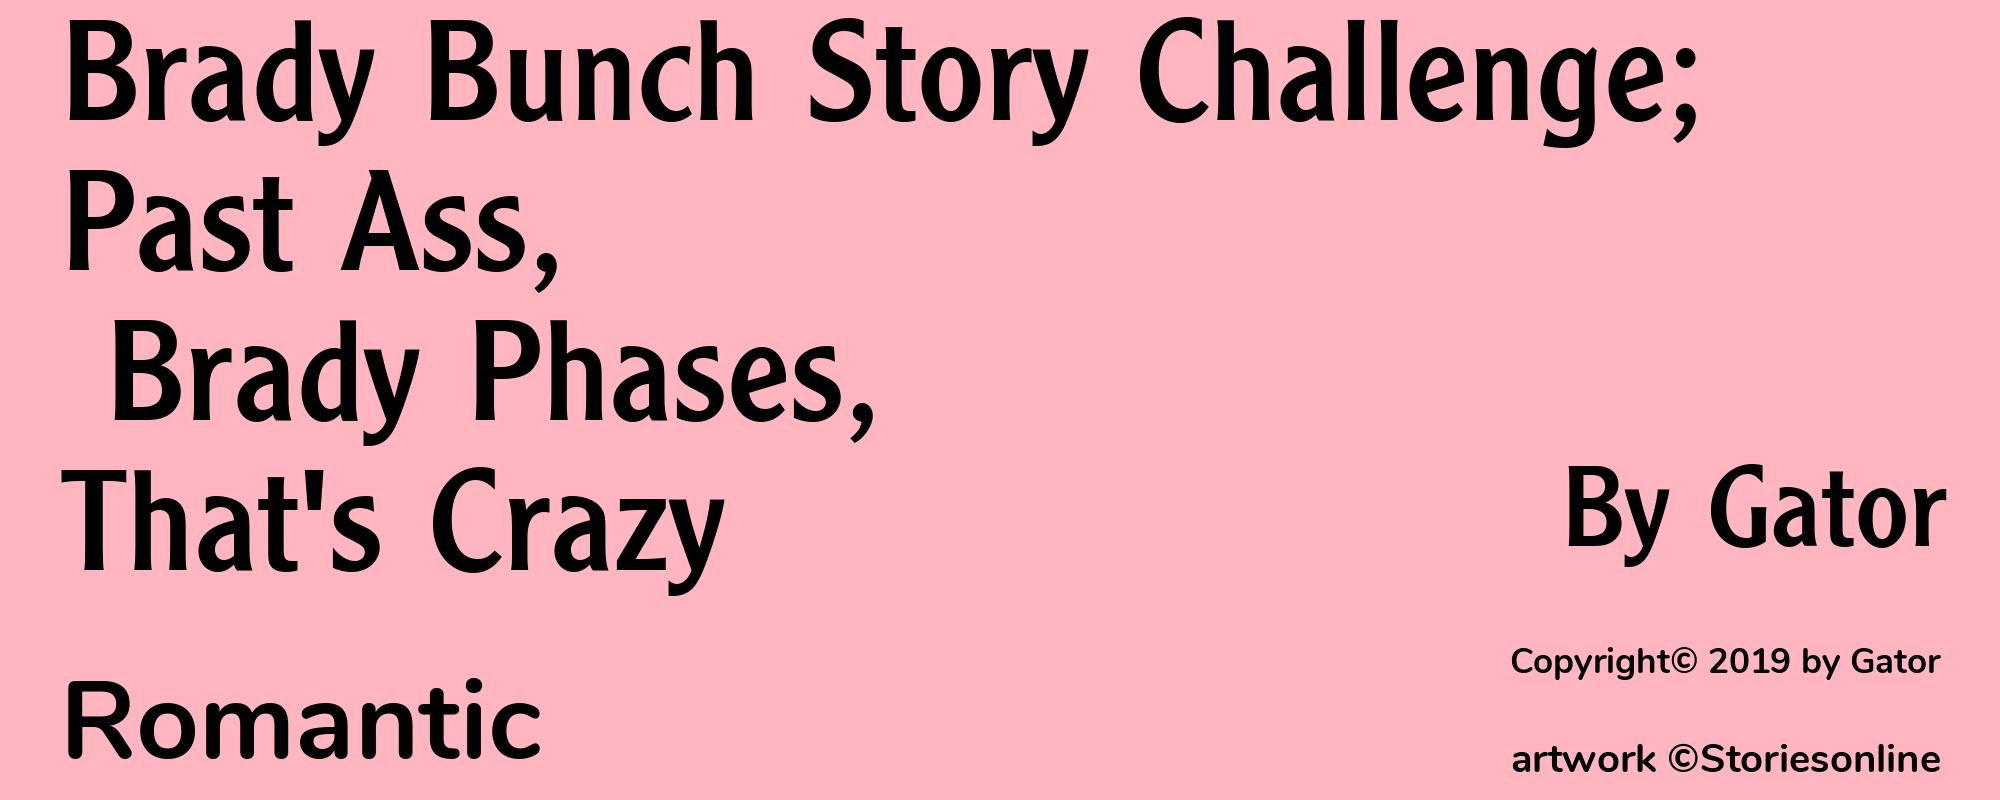 Brady Bunch Story Challenge; Past Ass, Brady Phases,That's Crazy - Cover